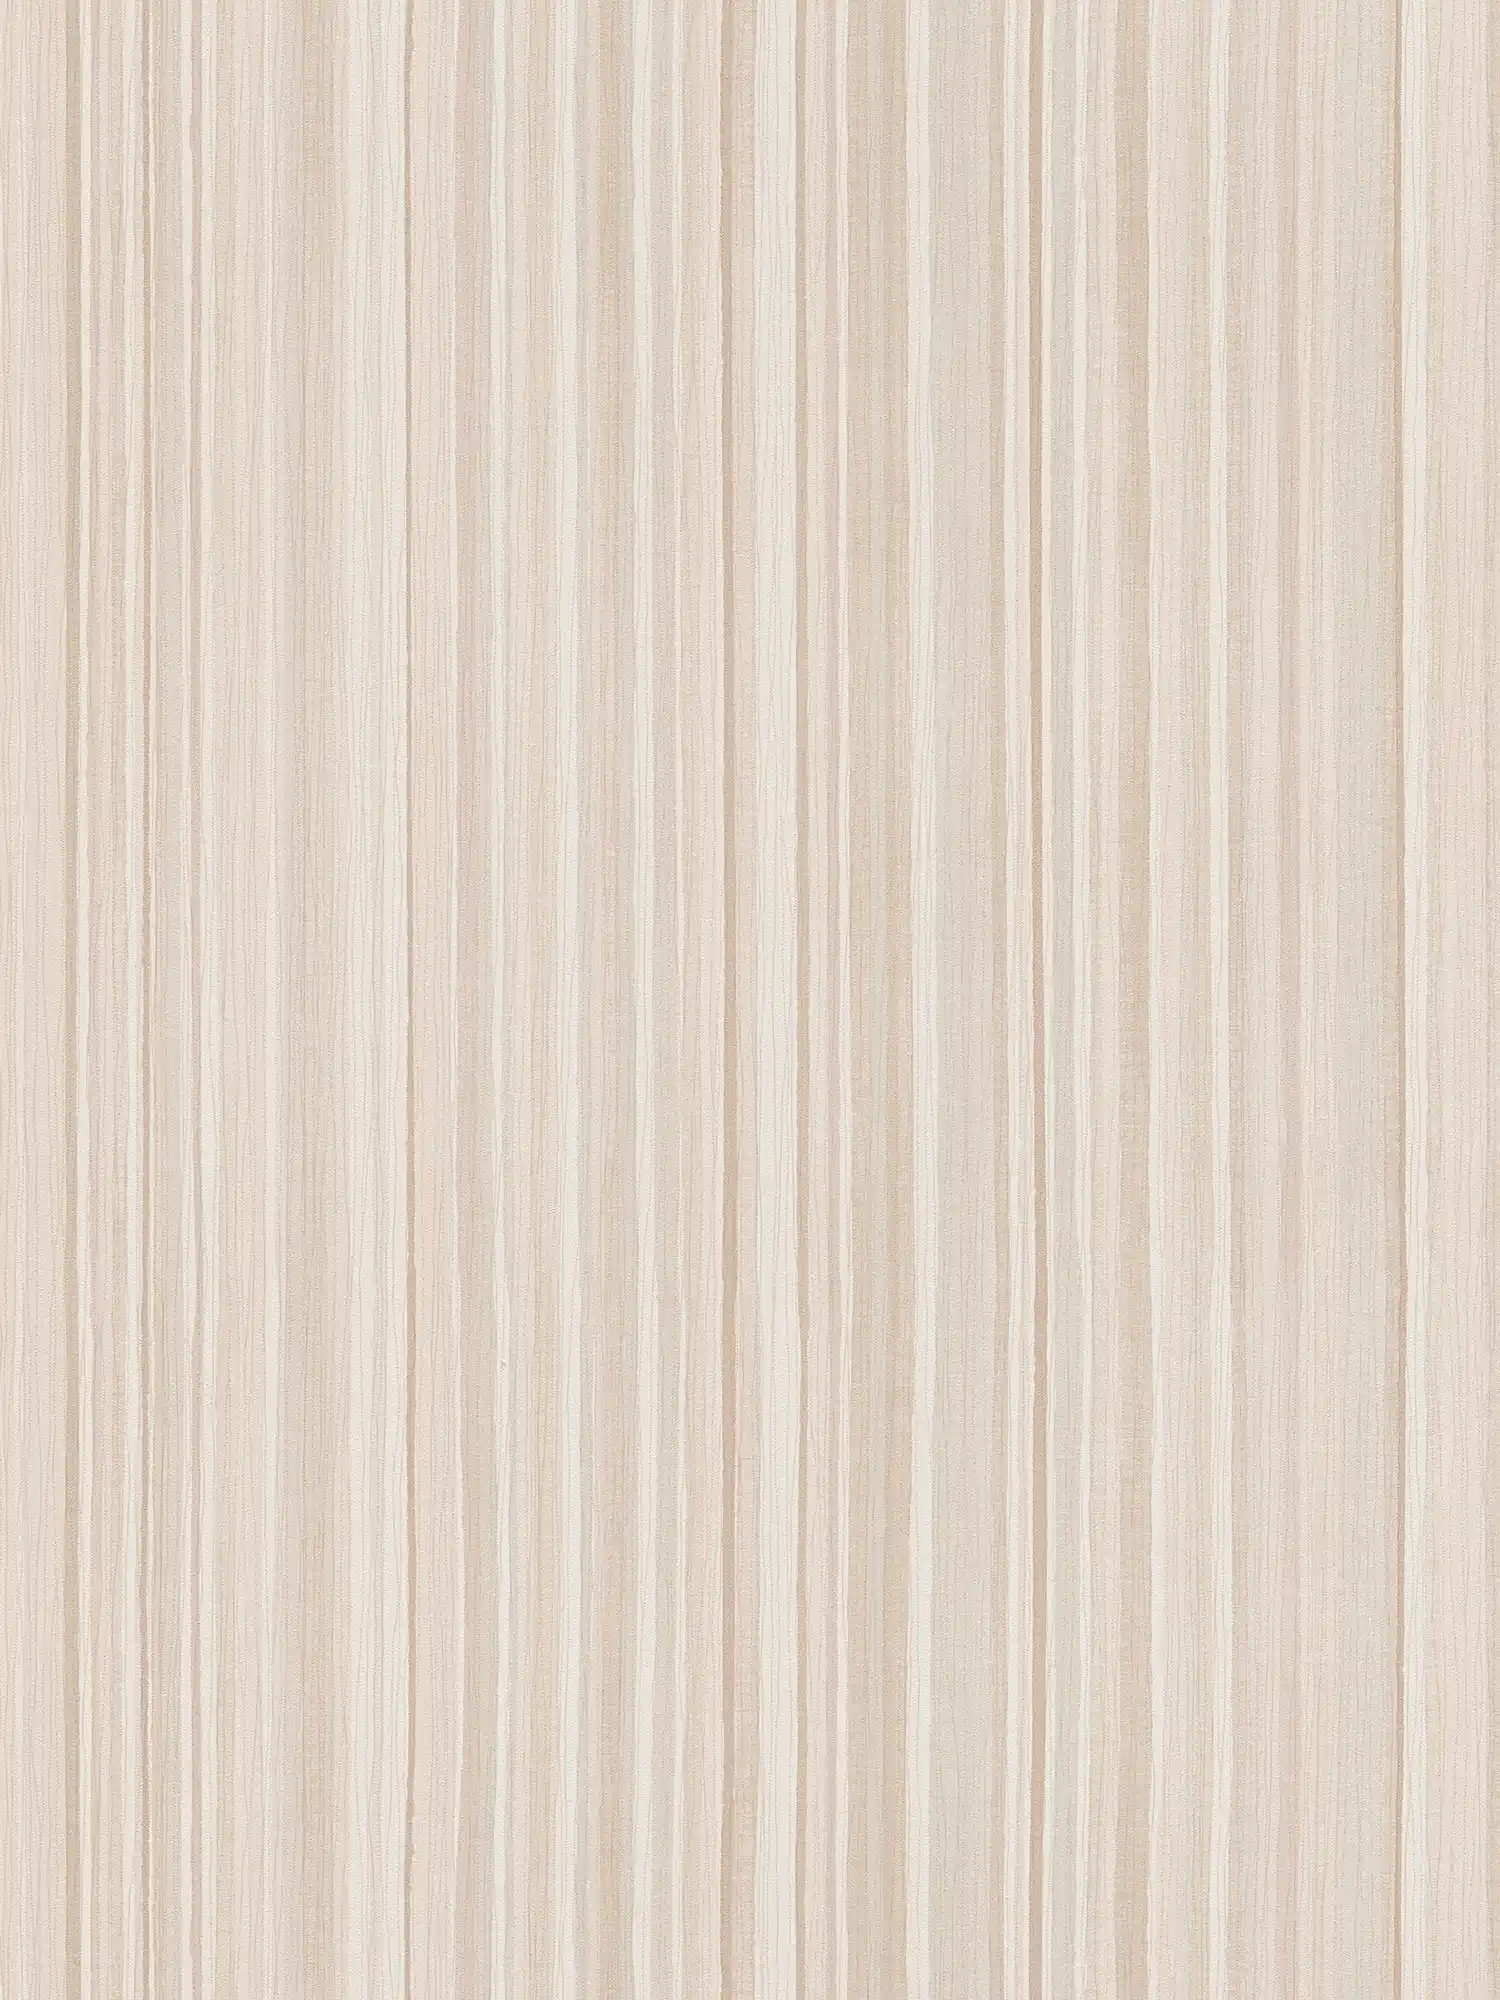 Striped wallpaper with narrow lines pattern - beige
